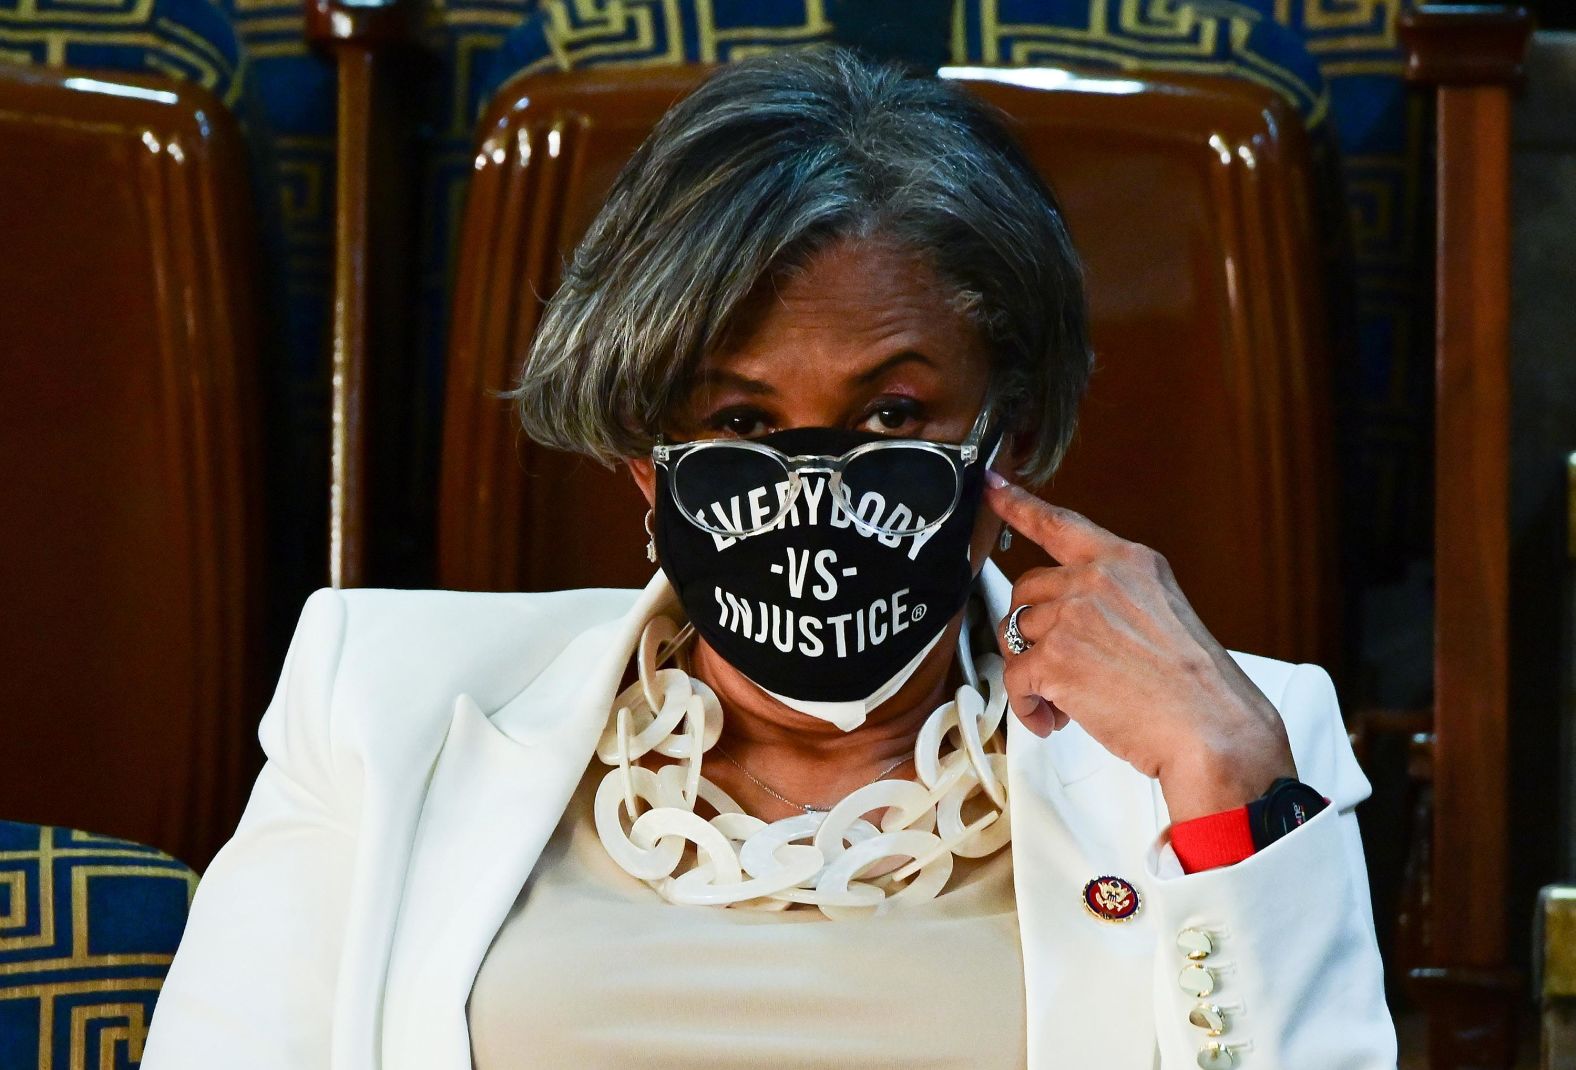 US Rep. Brenda Lawrence wears a mask that says "everybody vs. injustice" as she waits for Biden's speech.